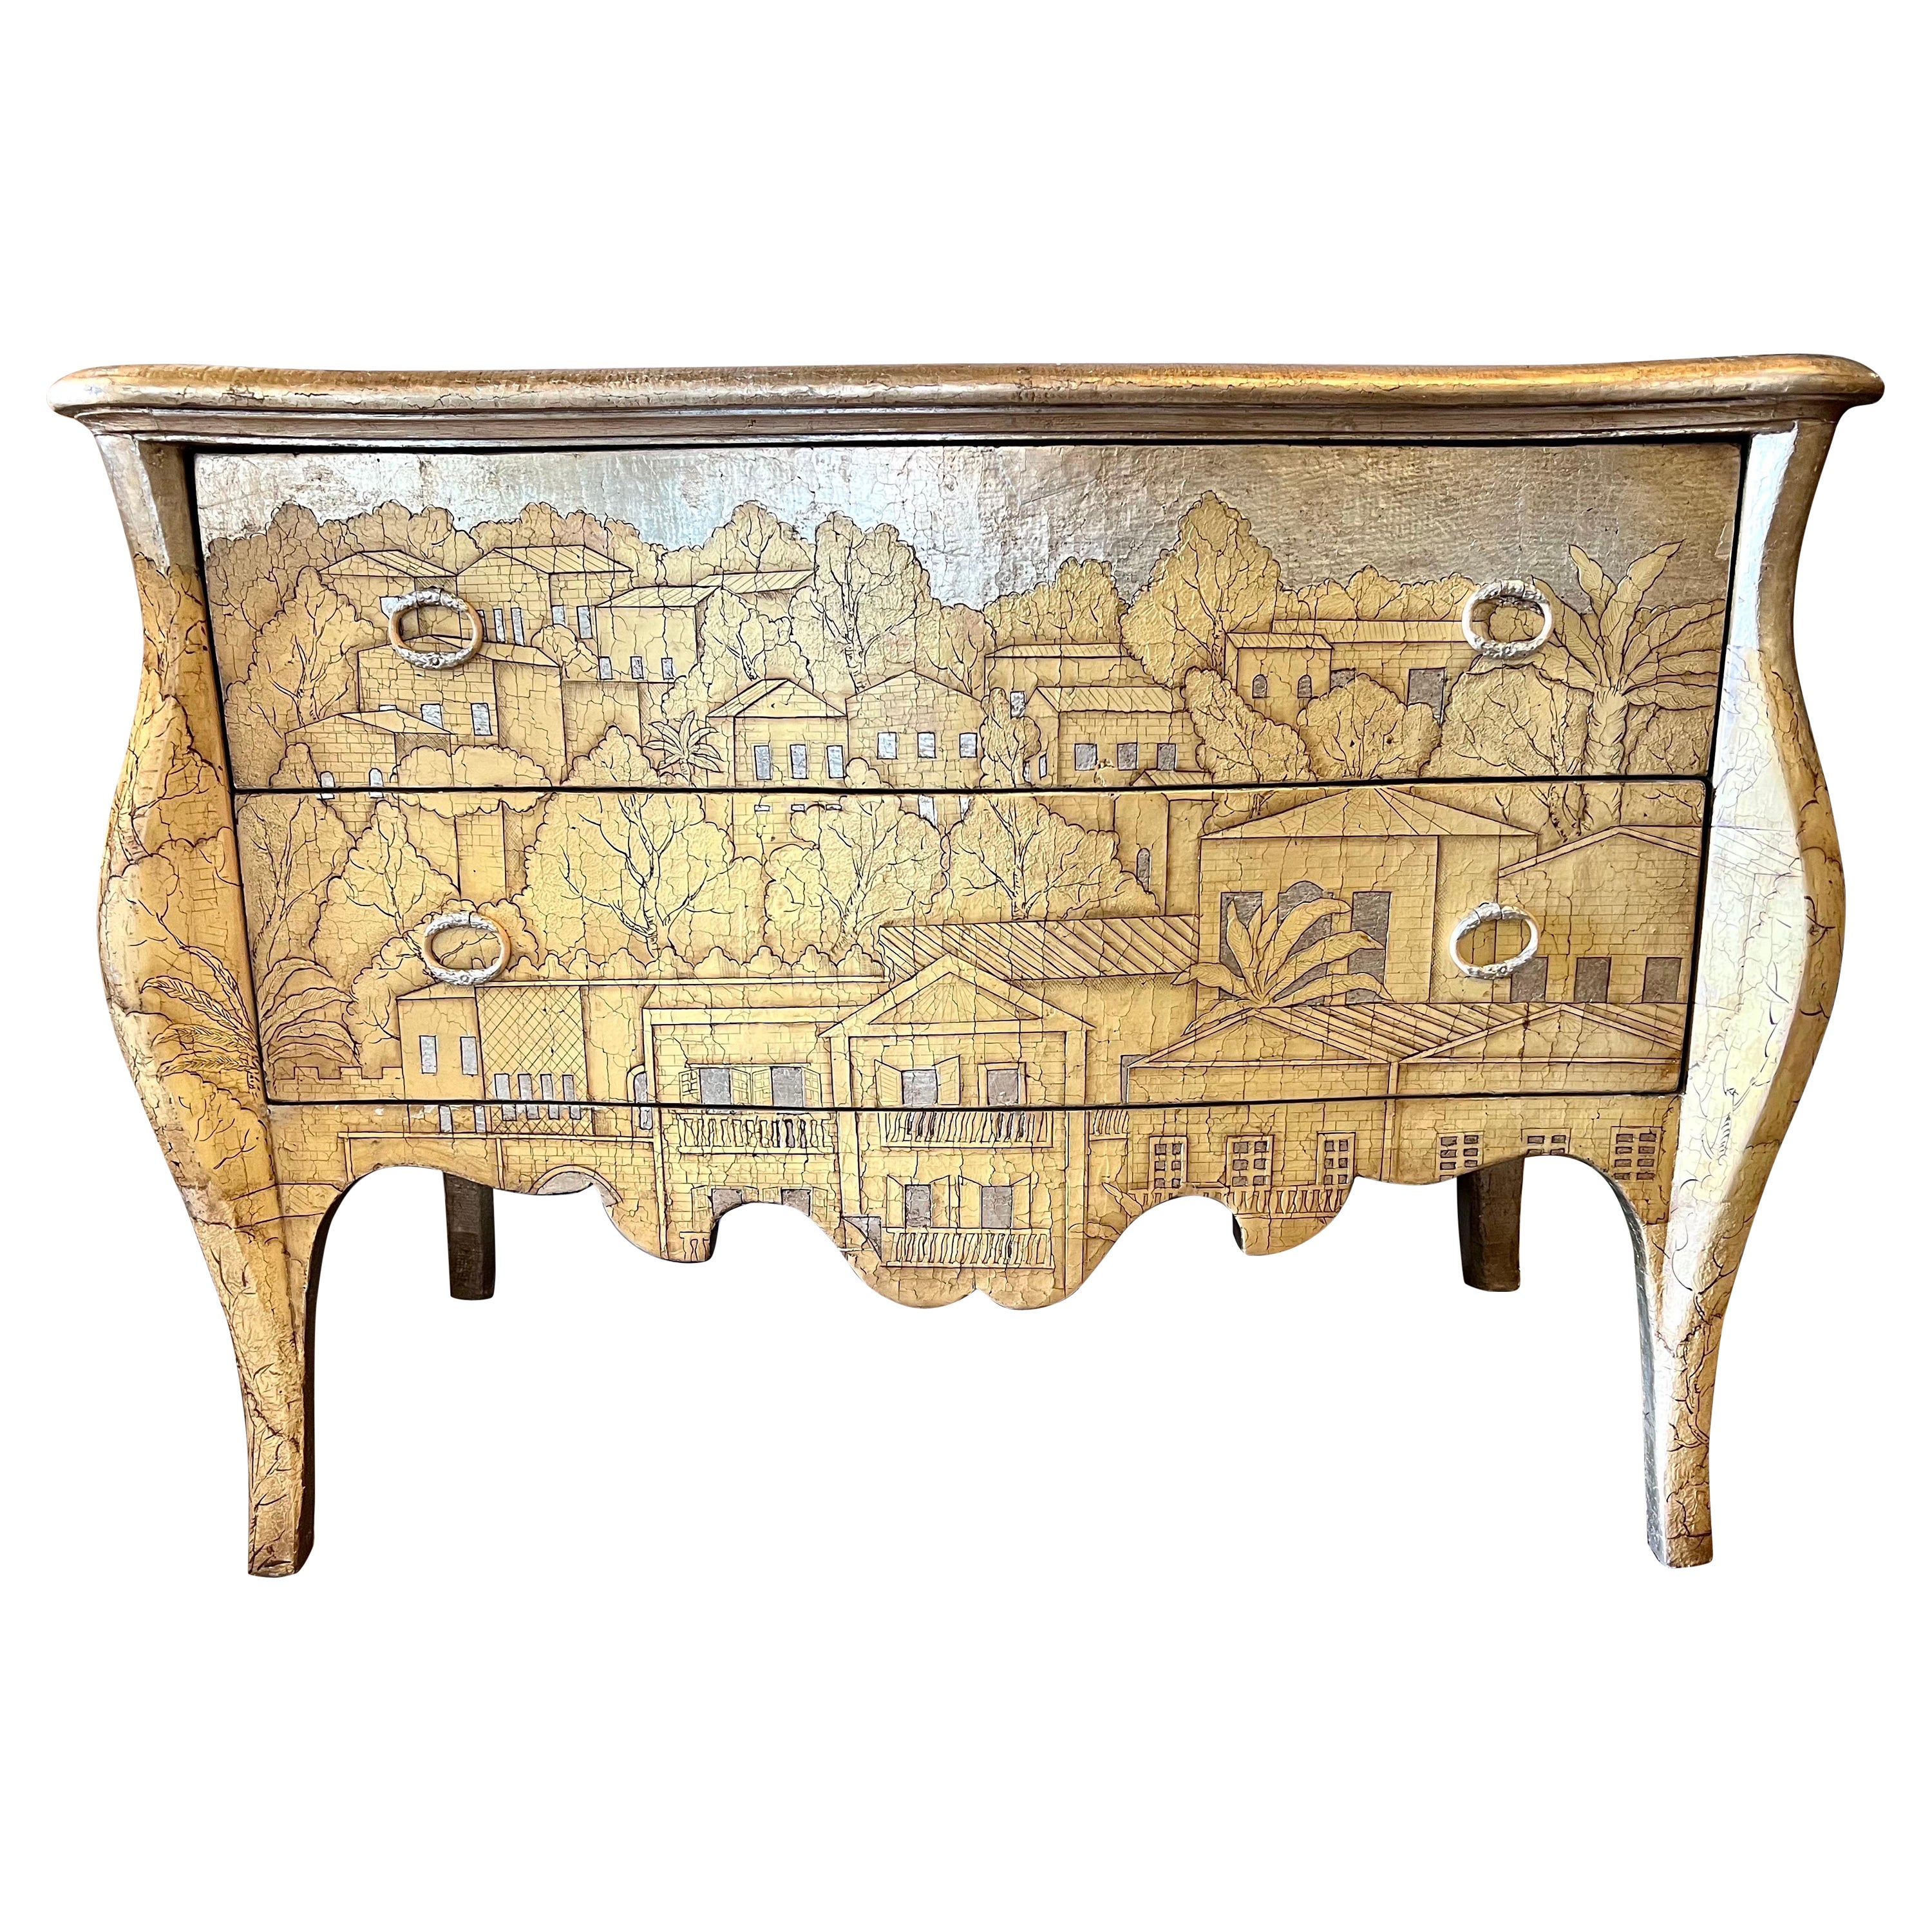 Theodore Alexander Carved Silver Leaf Bombay Chest Commode